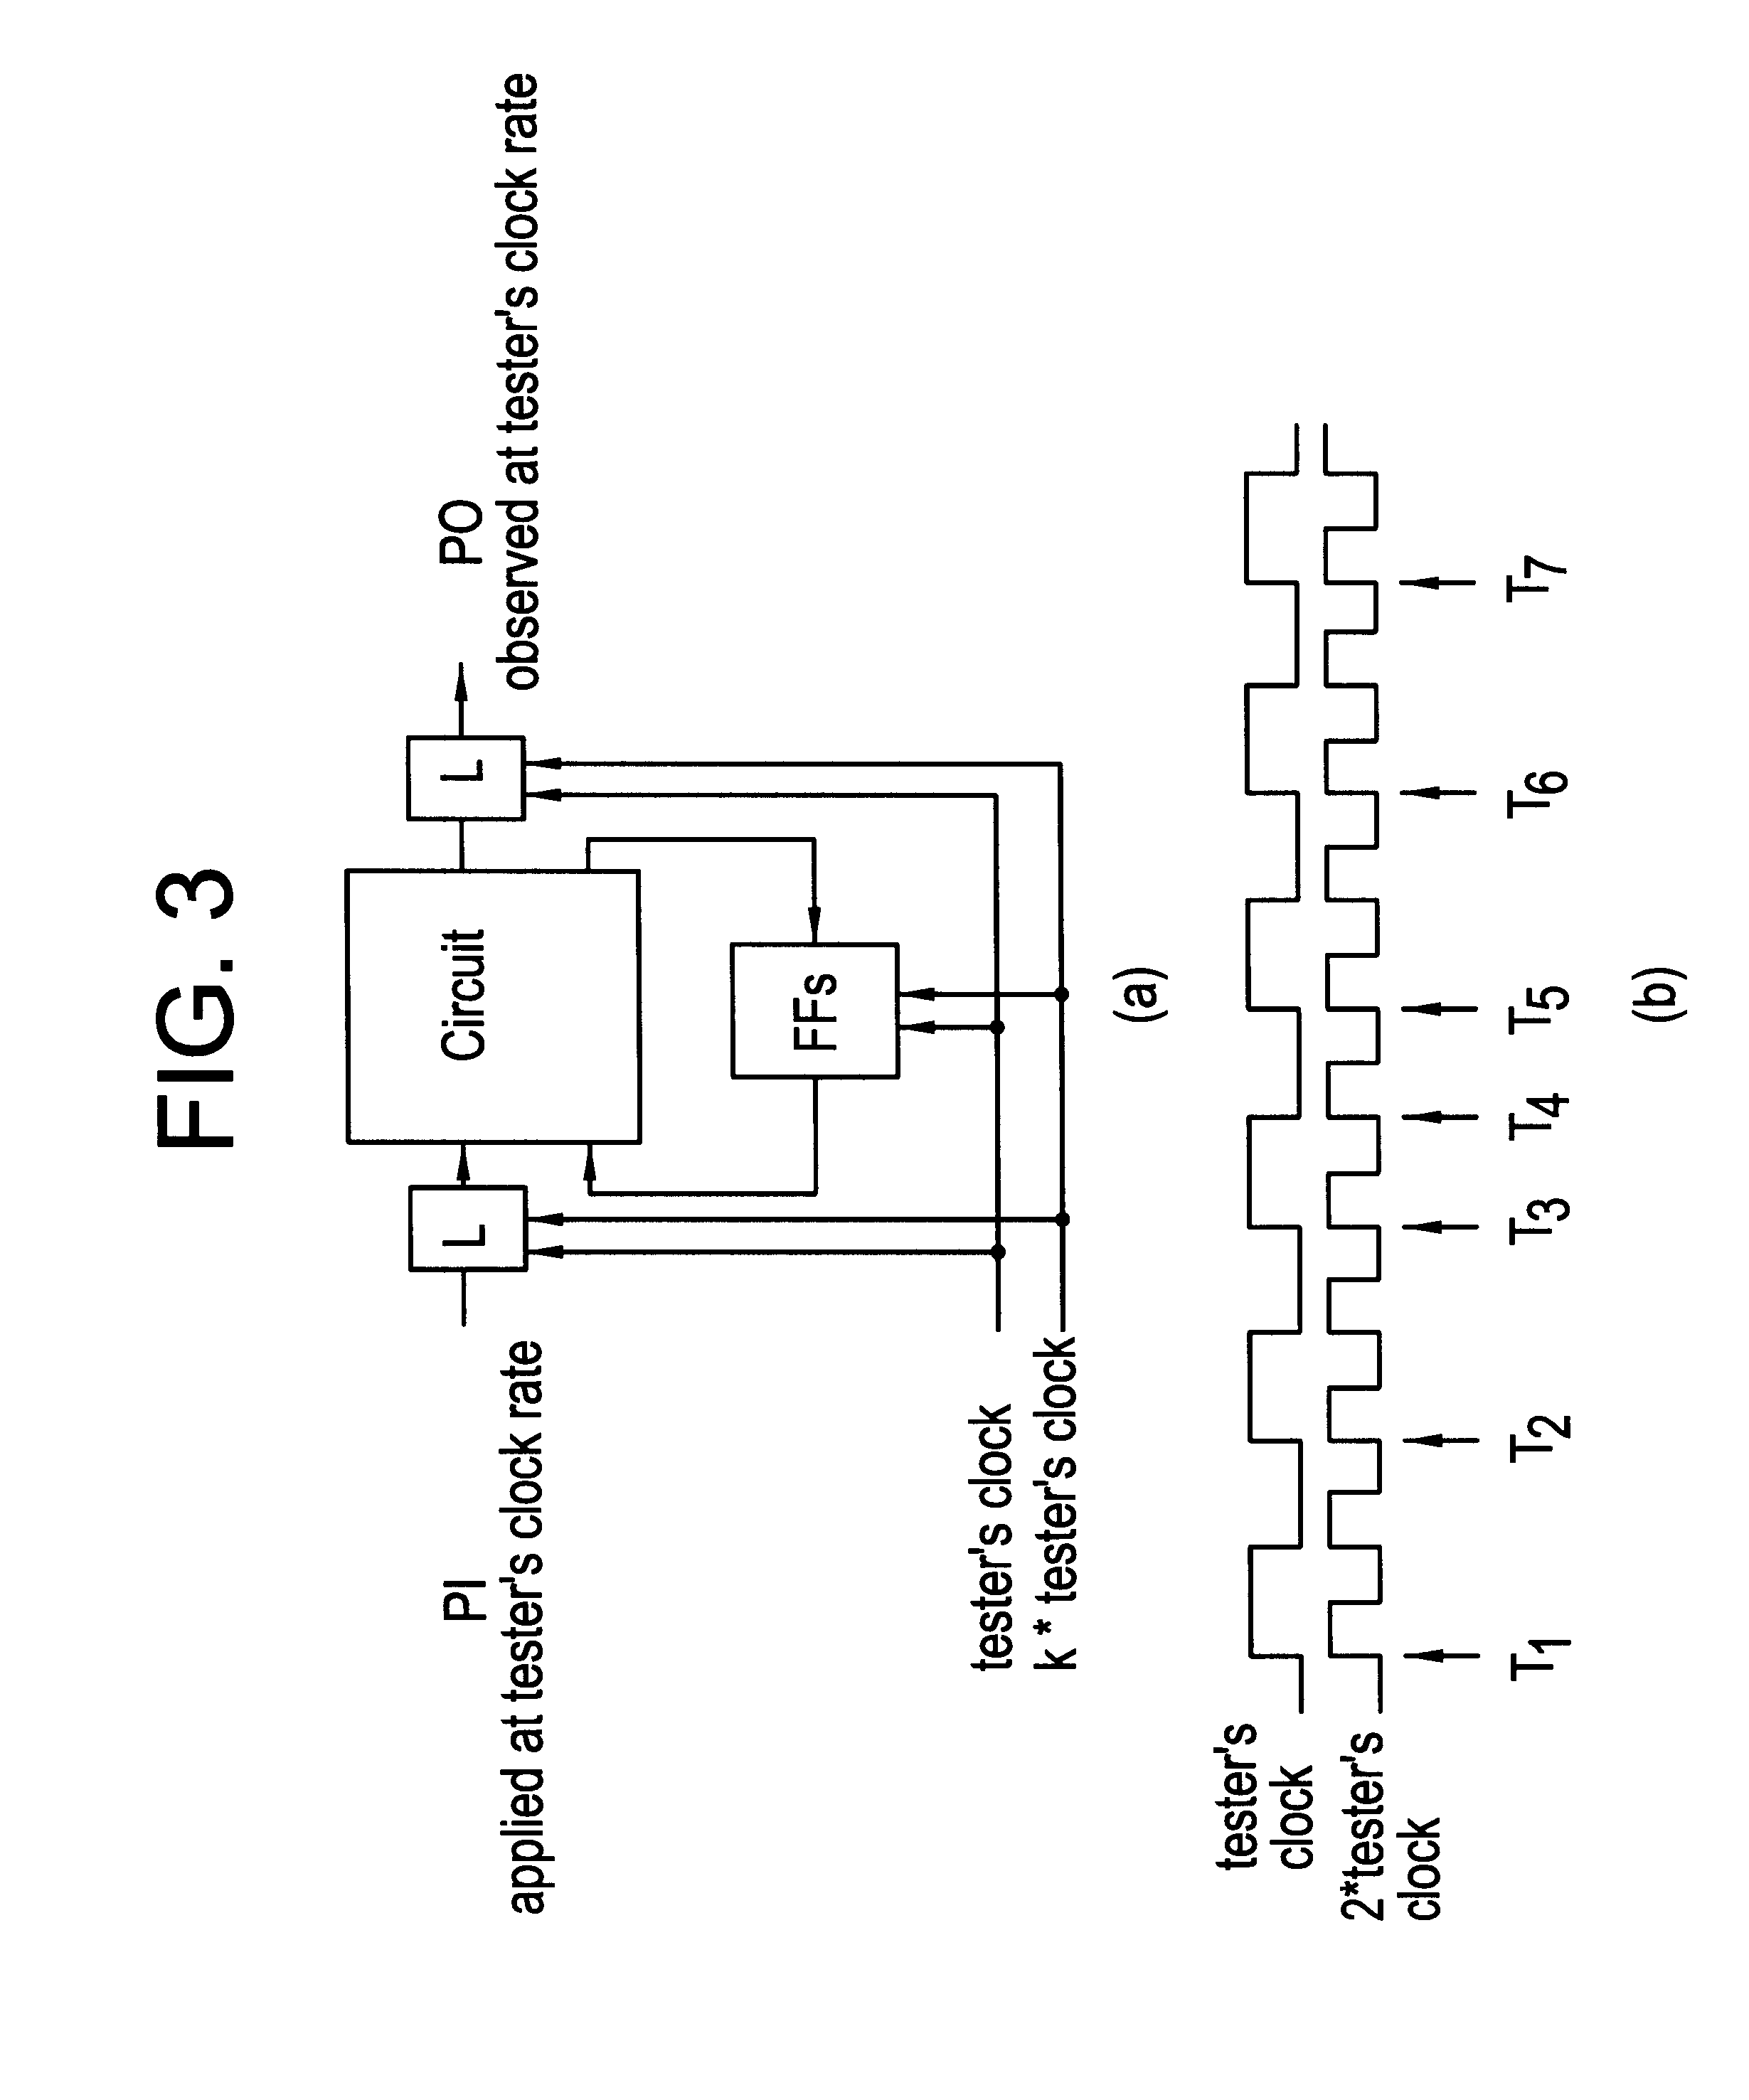 System and method for testing high speed VLSI devices using slower testers